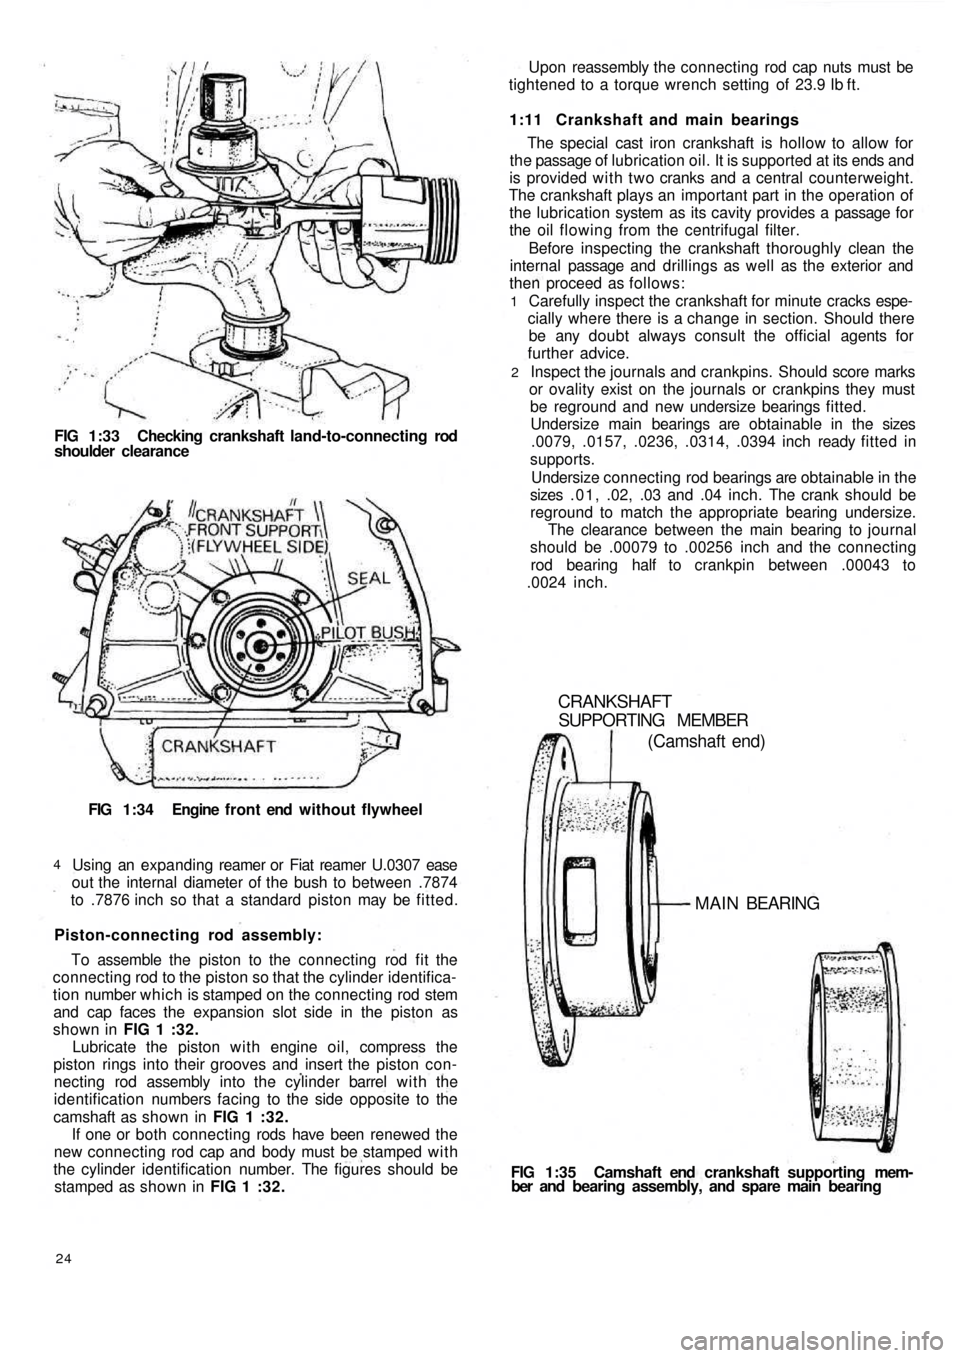 FIAT 500 1973 1.G Workshop Manual FIG 1:33 Checking crankshaft land-to-connecting rod
shoulder clearance
FIG 1:34 Engine  f r o n t  end  without flywheel
Using an expanding reamer or Fiat reamer U.0307 ease
out the internal diameter 